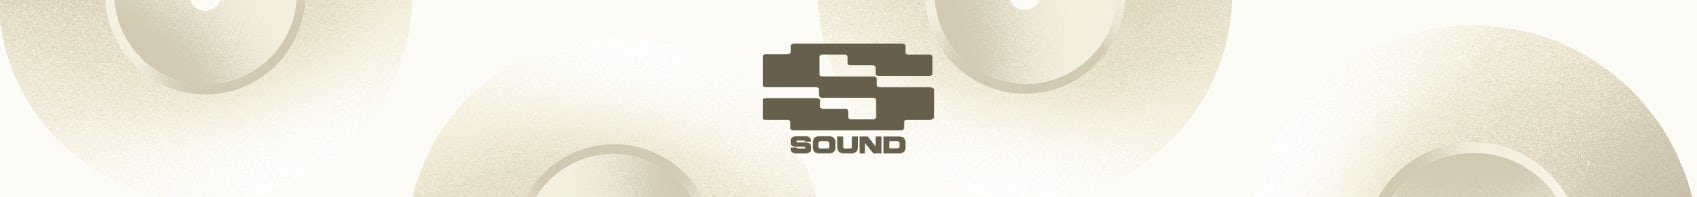 Thank you to our sponsor Sound.